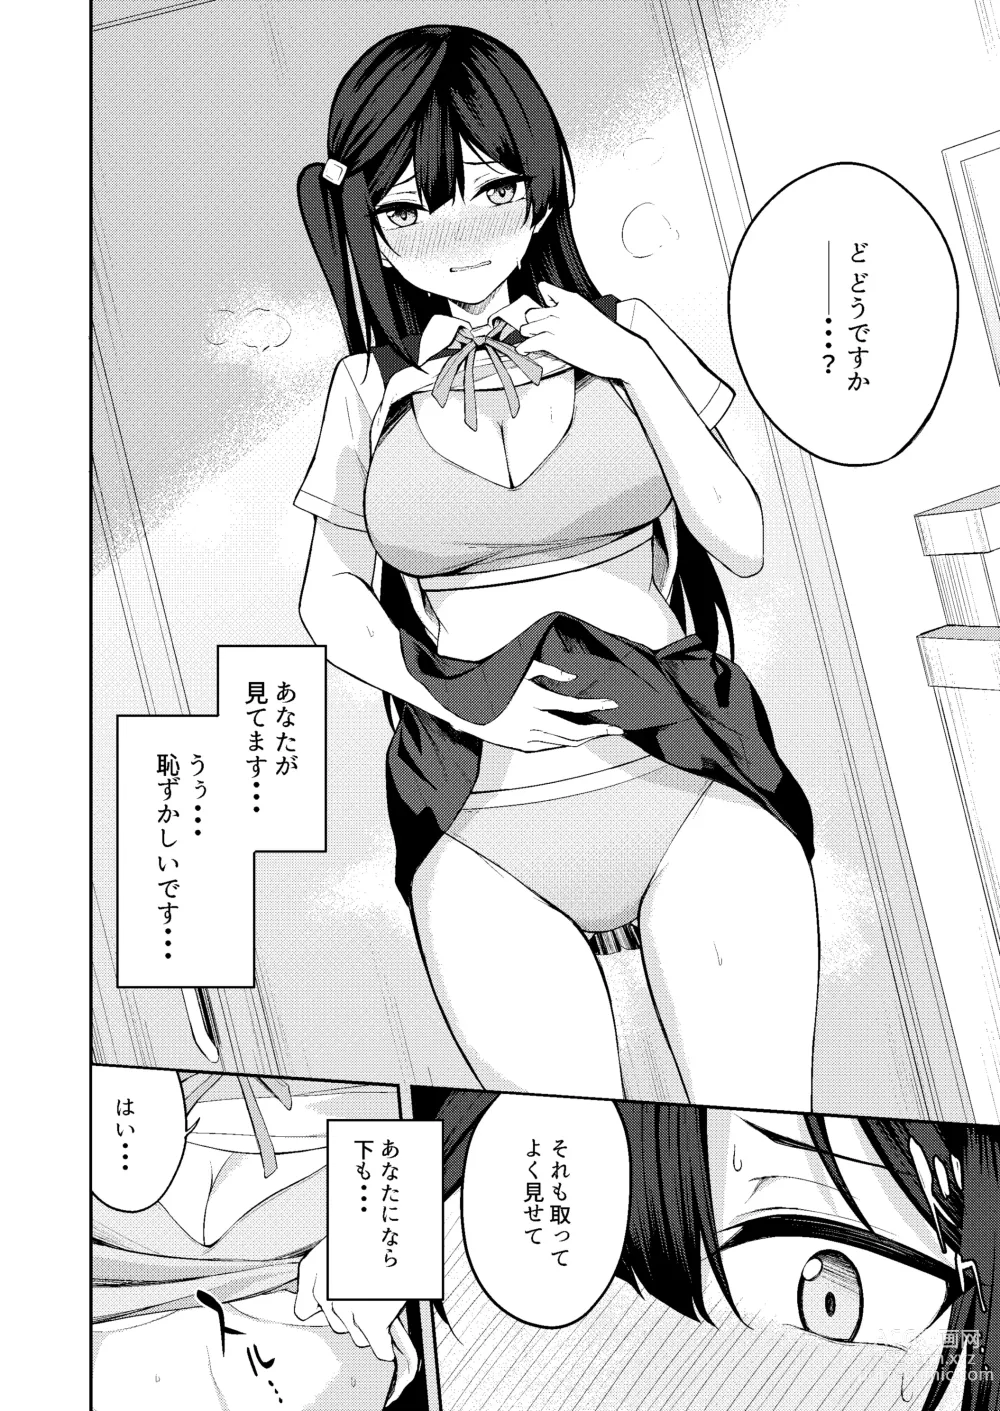 Page 7 of doujinshi Sunny Scarlet